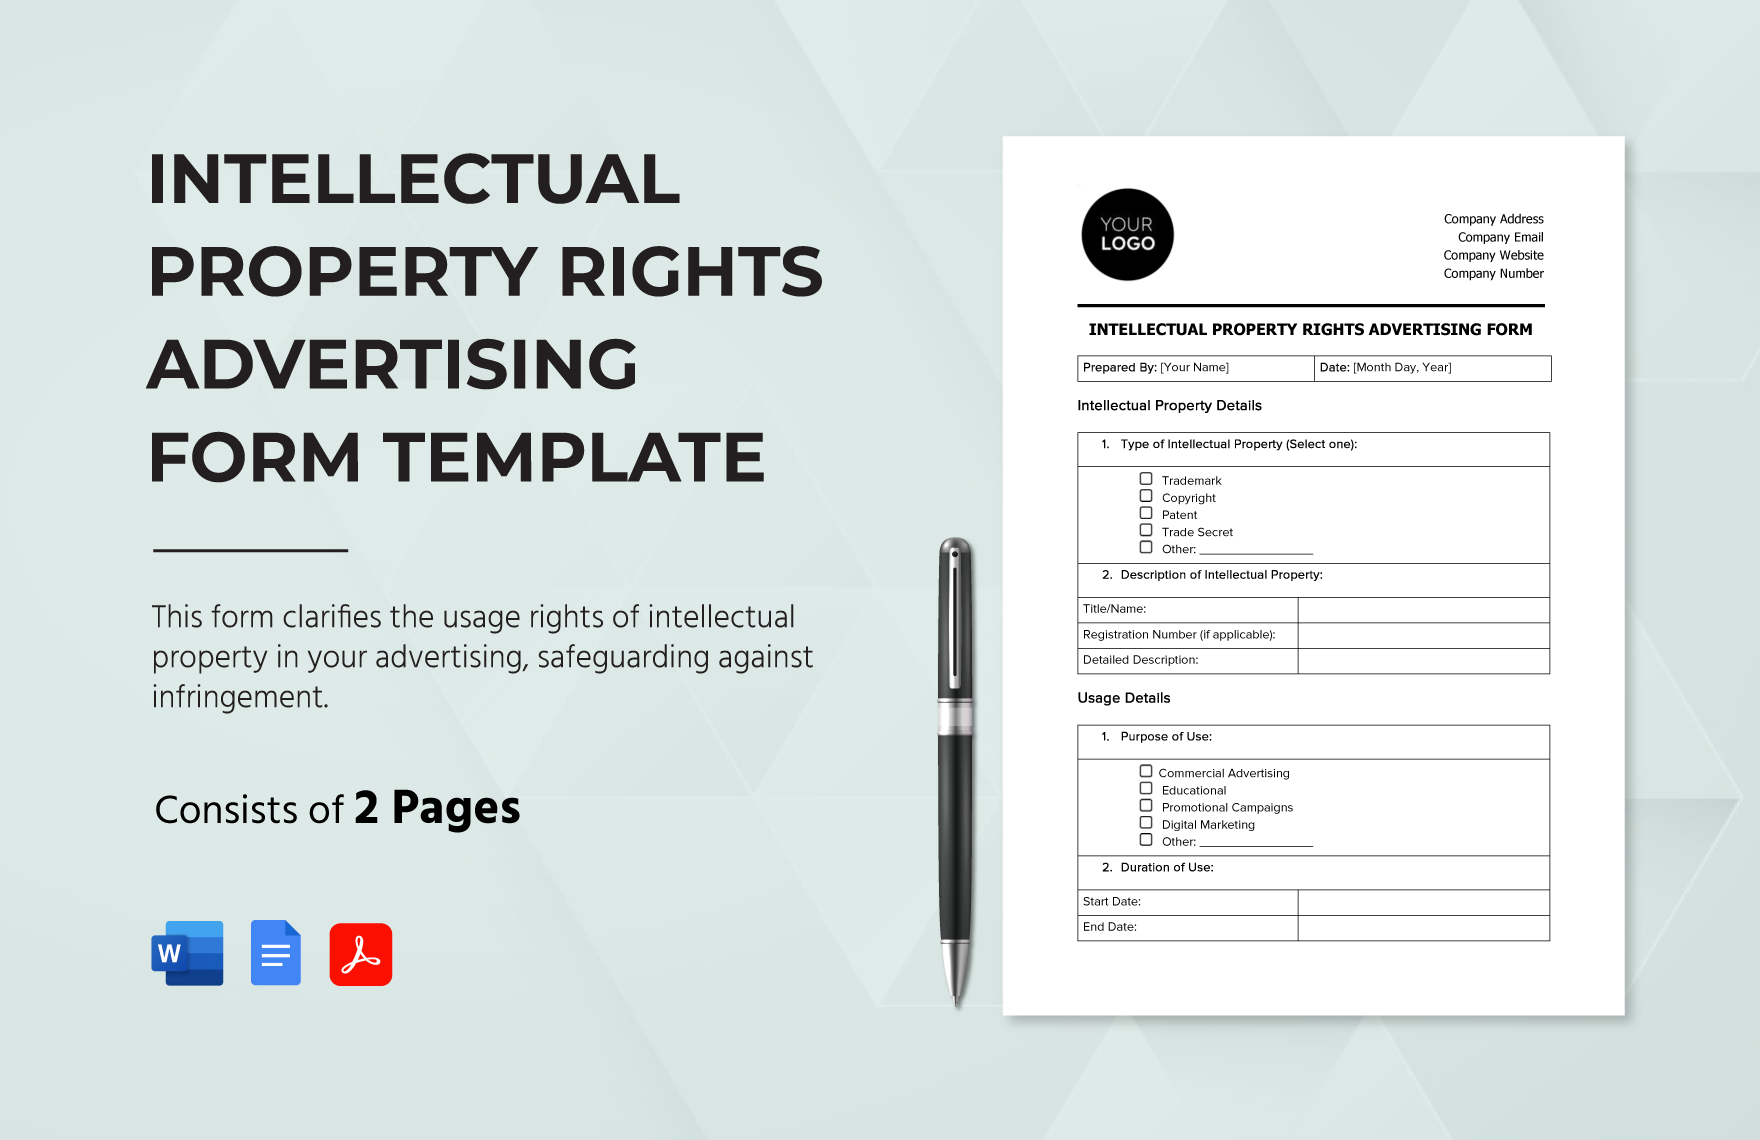 Intellectual Property Rights Advertising Form Template in Word, Google Docs, PDF